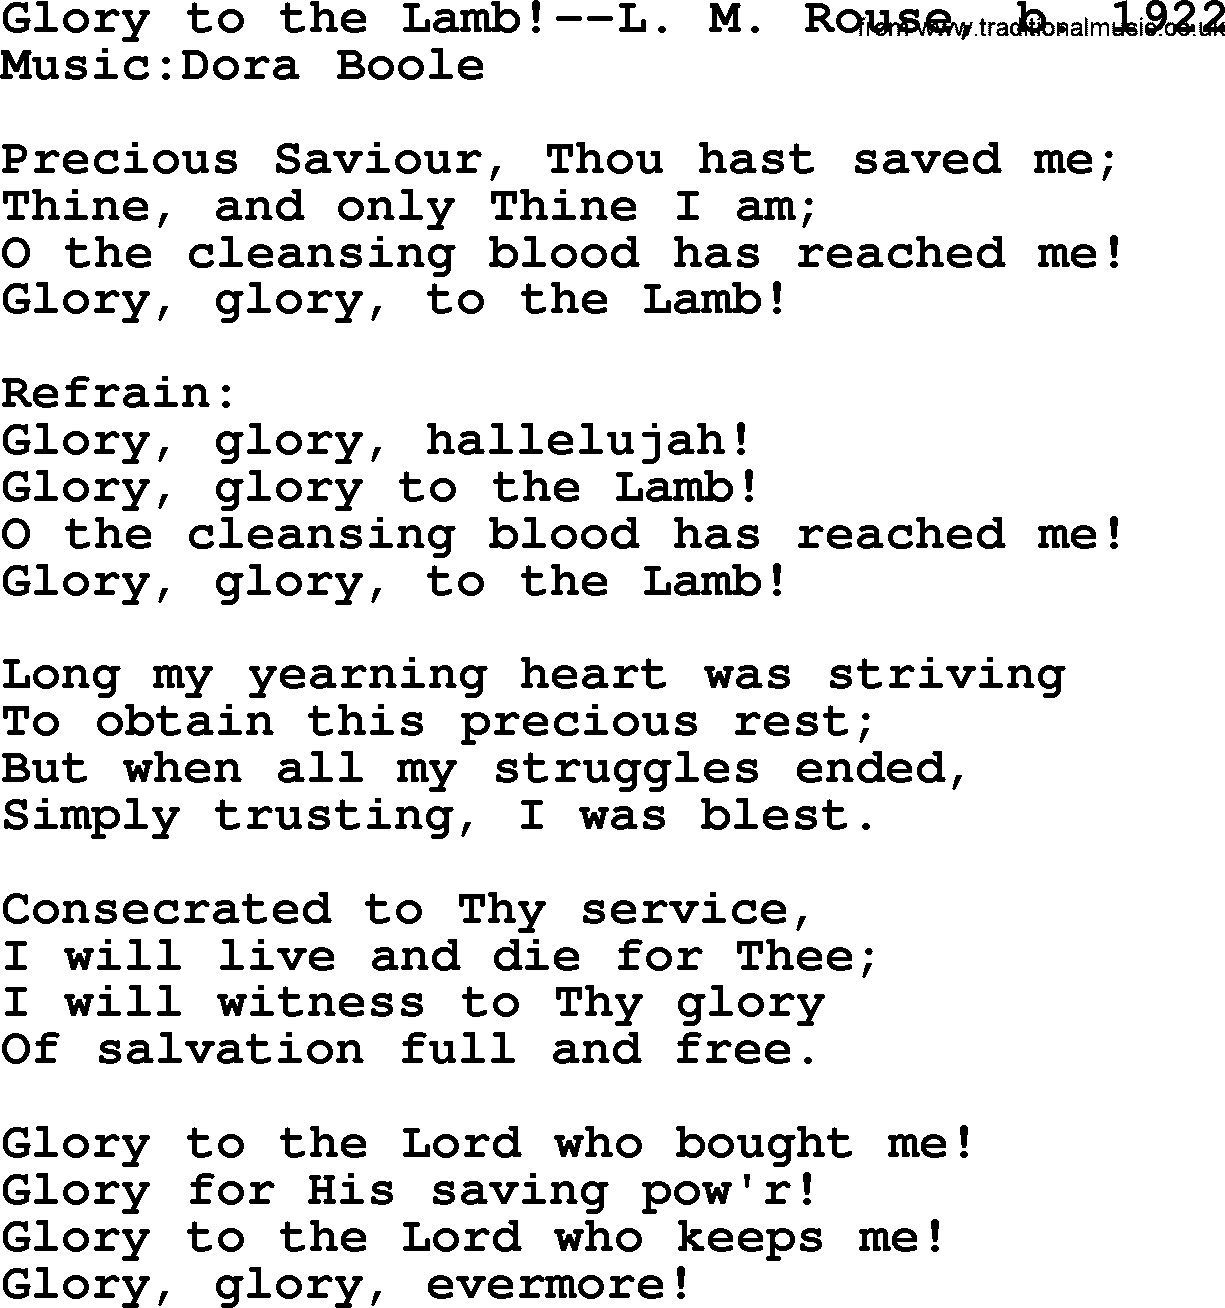 Ascensiontide Hynms collection, Hymn: Glory To The Lamb!-L M Rouse, lyrics and PDF